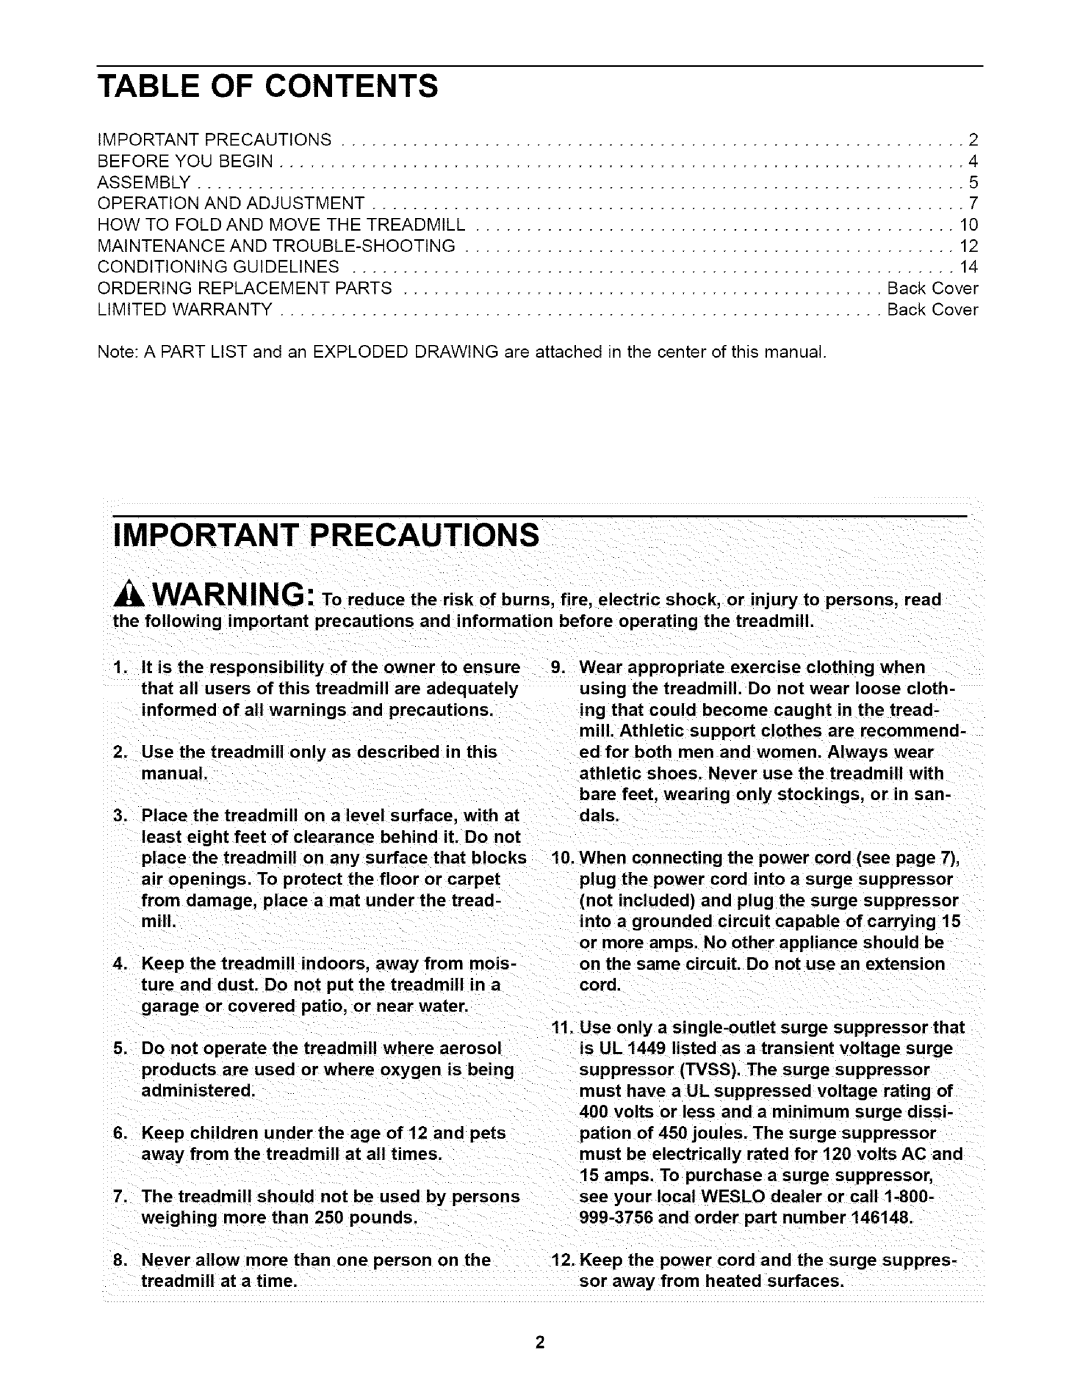 Weslo WLTL29010 user manual Table Of Contents, Important Precautions, Use the treadmill only as described in this manual 